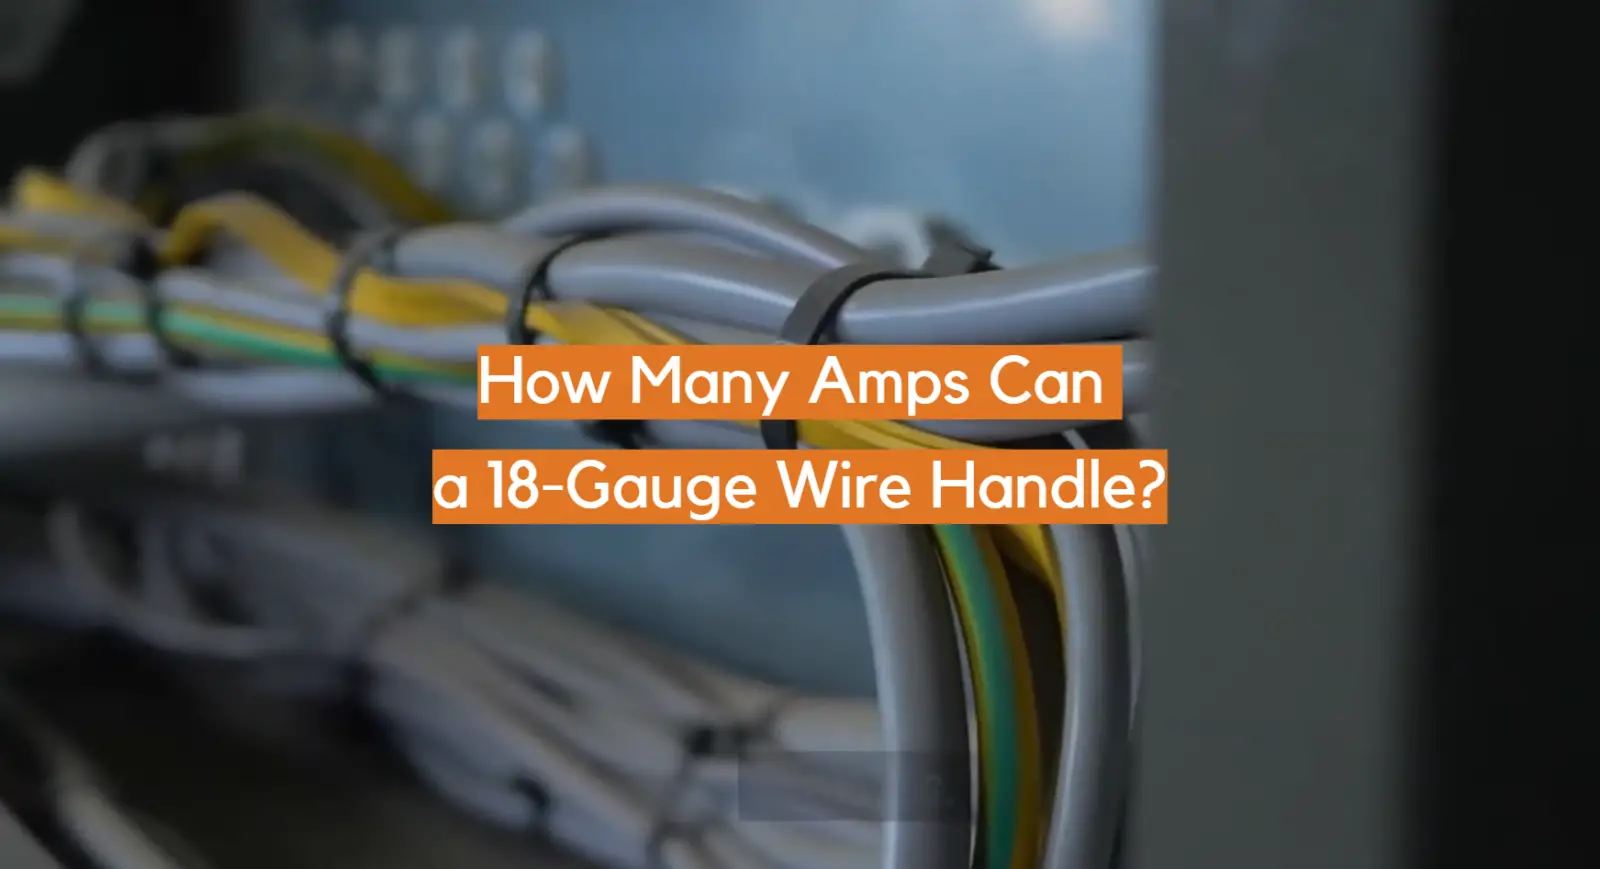 How Many Amps Can a 18-Gauge Wire Handle?